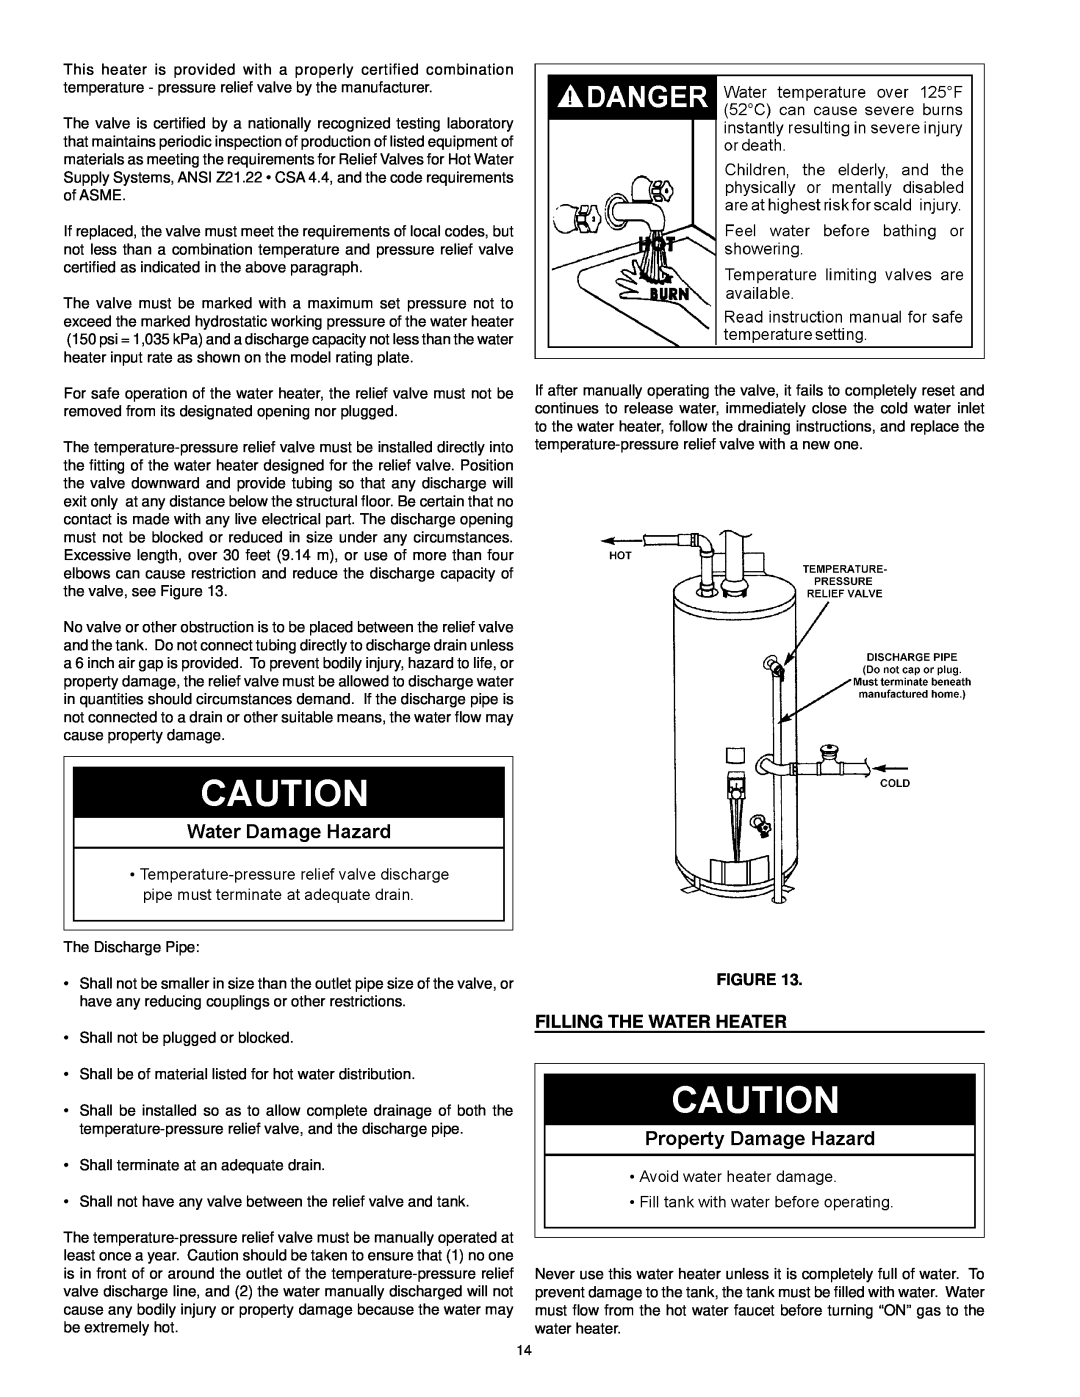 Kenmore 153.33385 owner manual Filling The Water Heater, Figure 